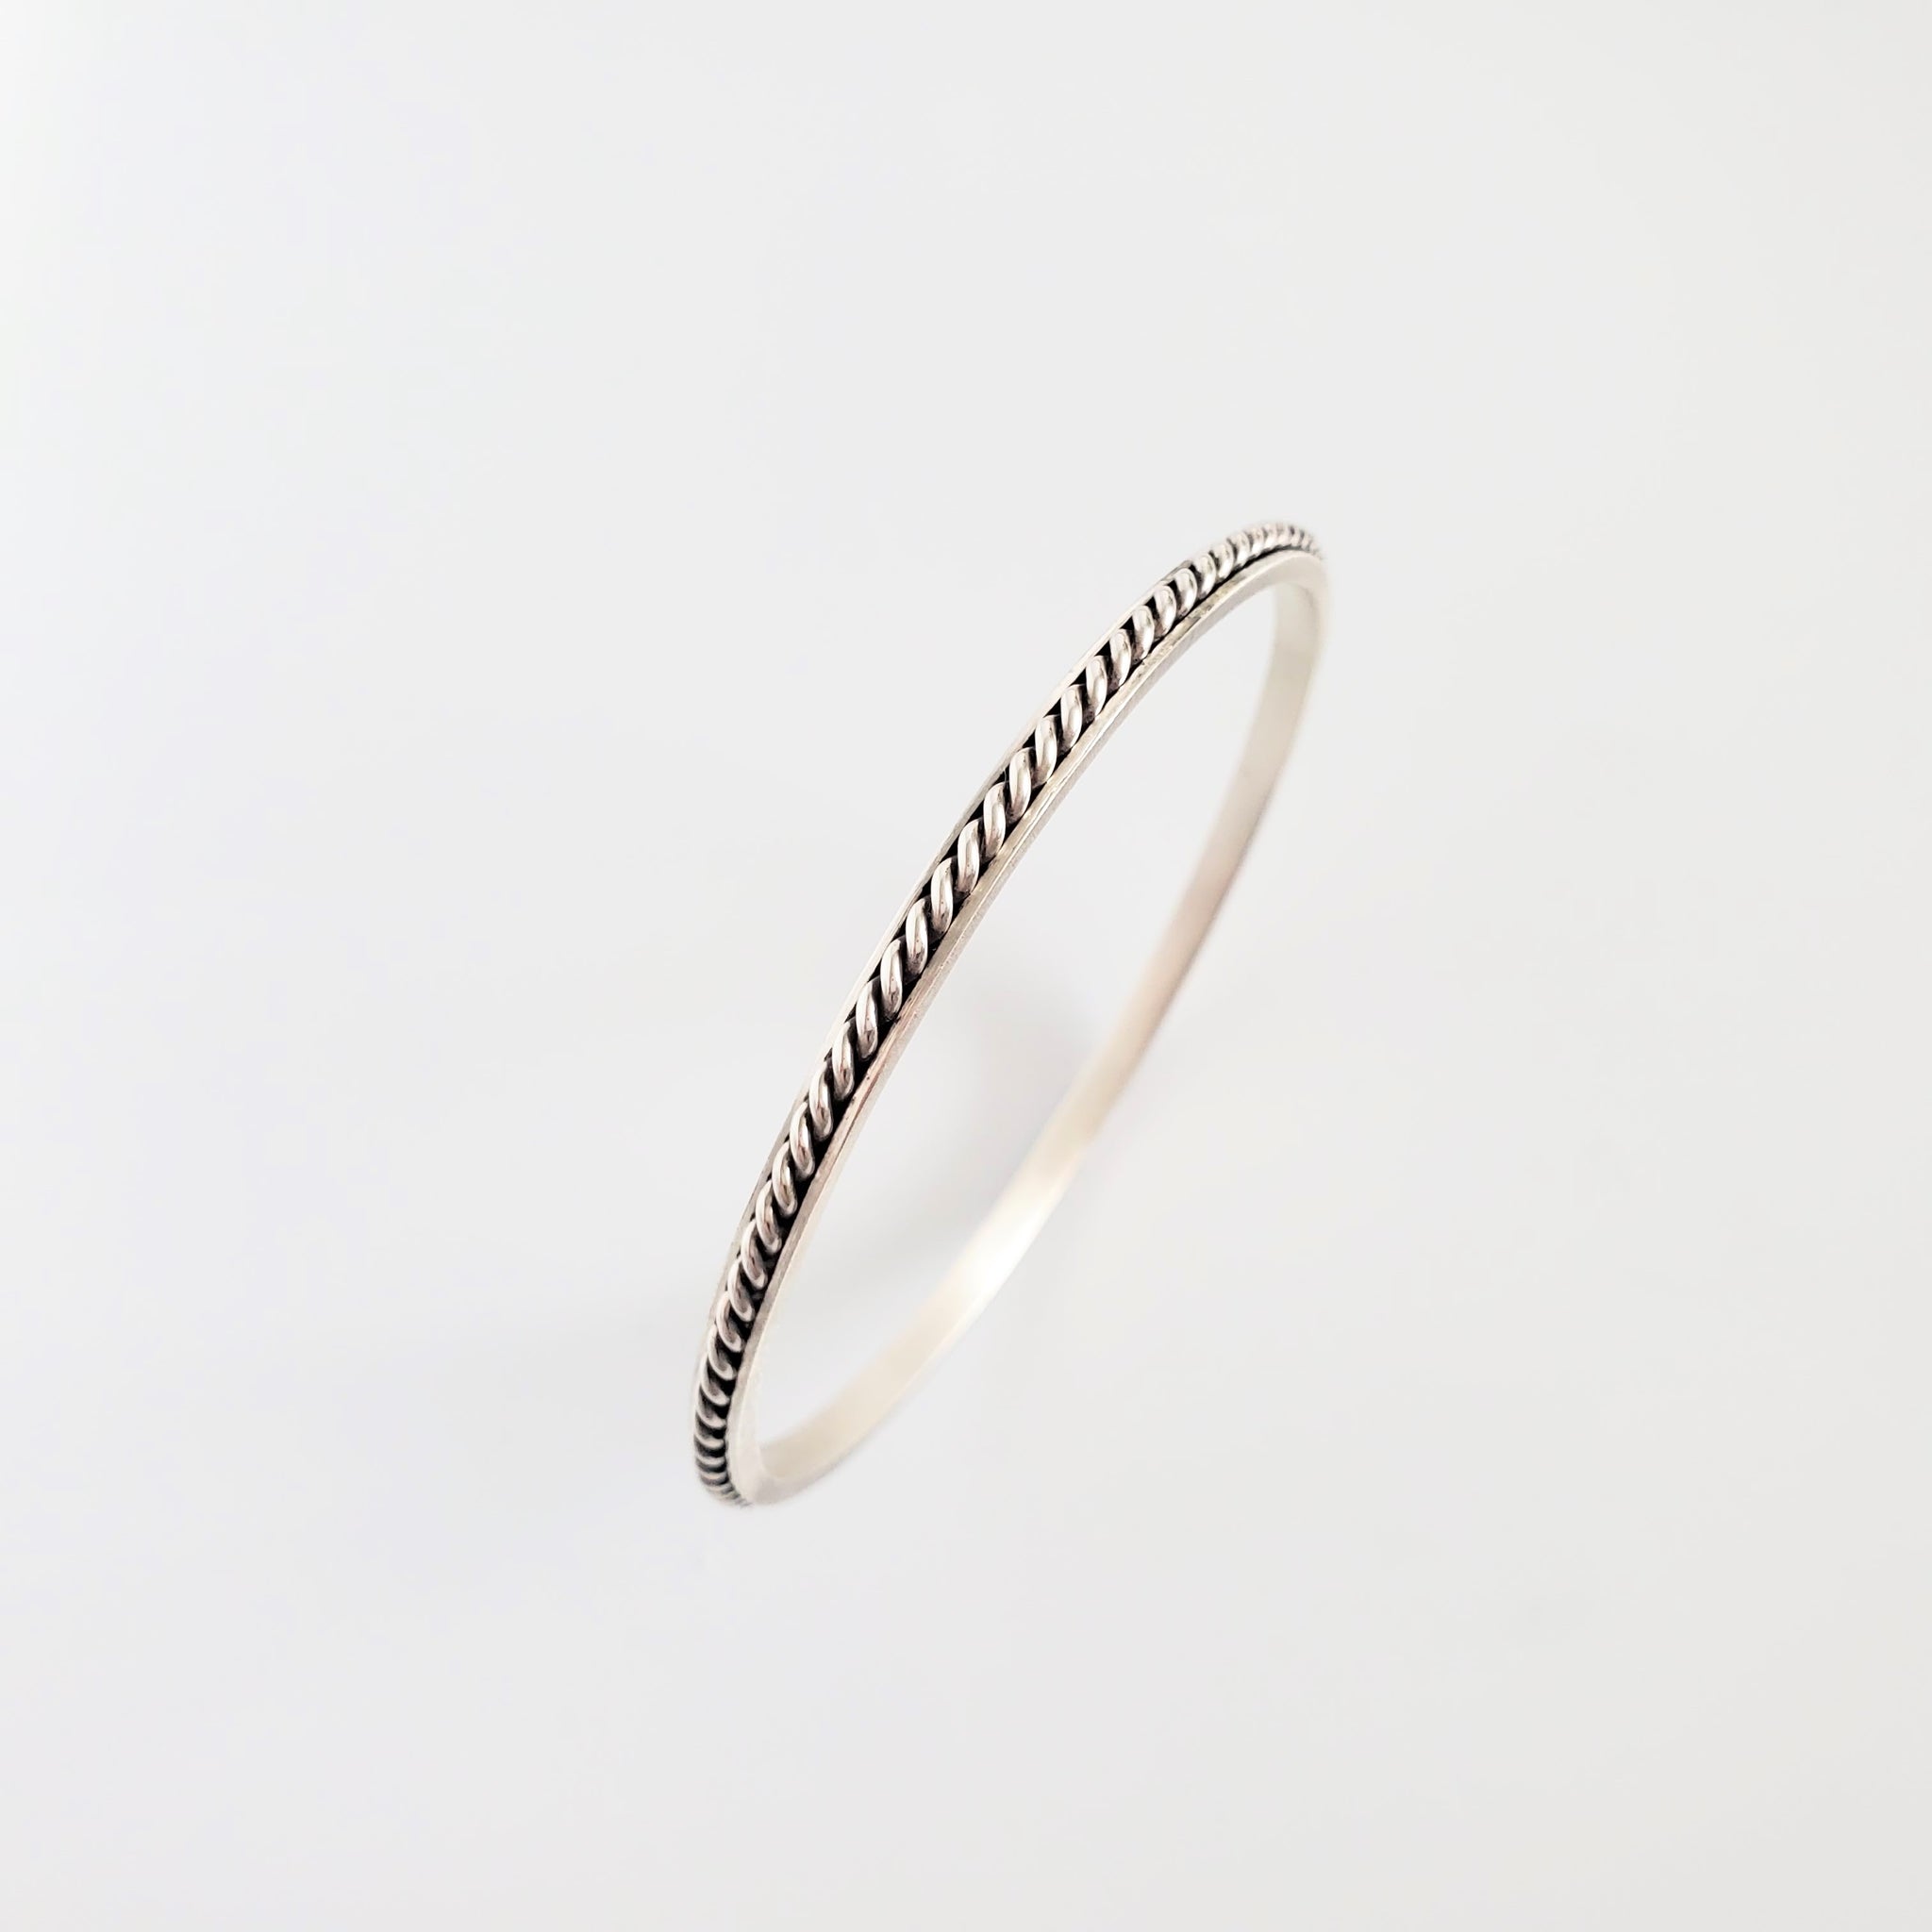 SOLID STERLING SILVER BANGLE WITH TWISTED WIRE